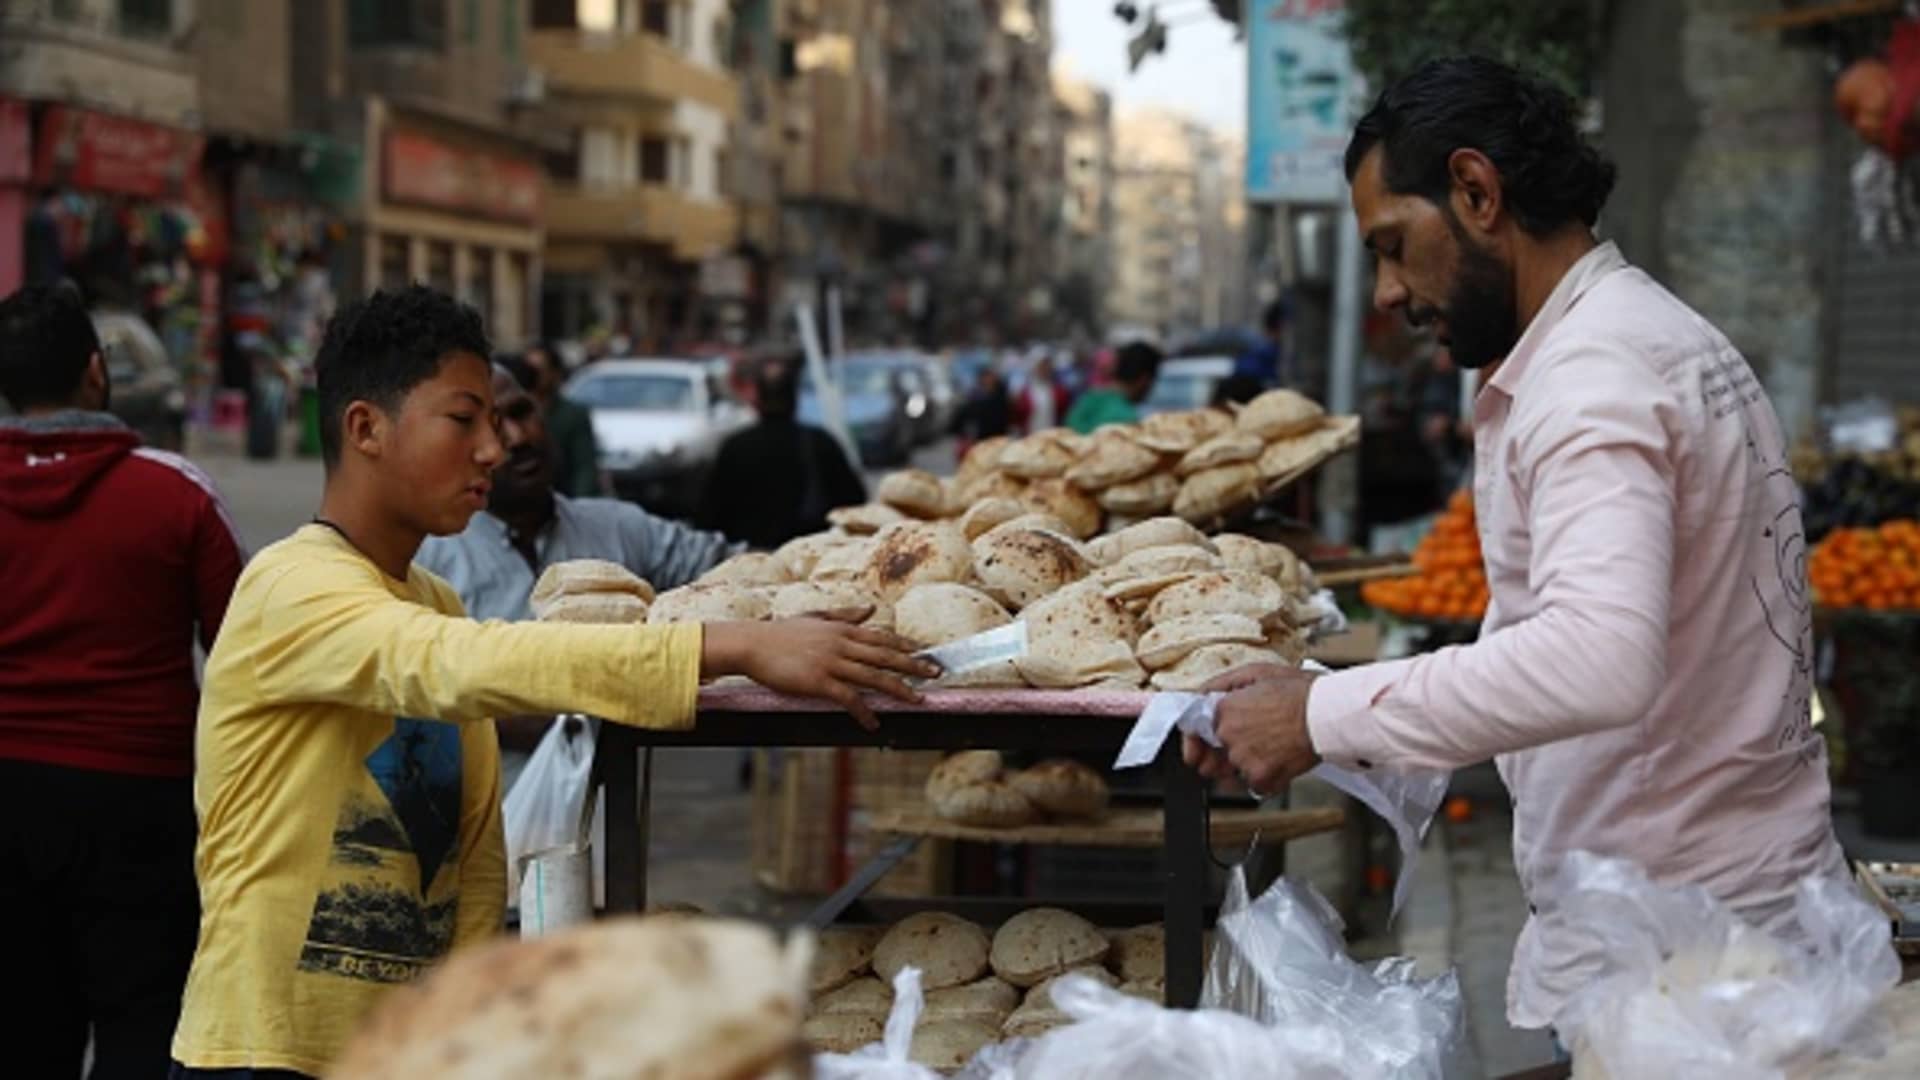 Russia's invasion of Ukraine is threatening global wheat and grain supplies, a particular risk for Middle Eastern and African countries like Egypt, where bread is a major dietary staple. Cairo, Egypt, on March 9, 2022.